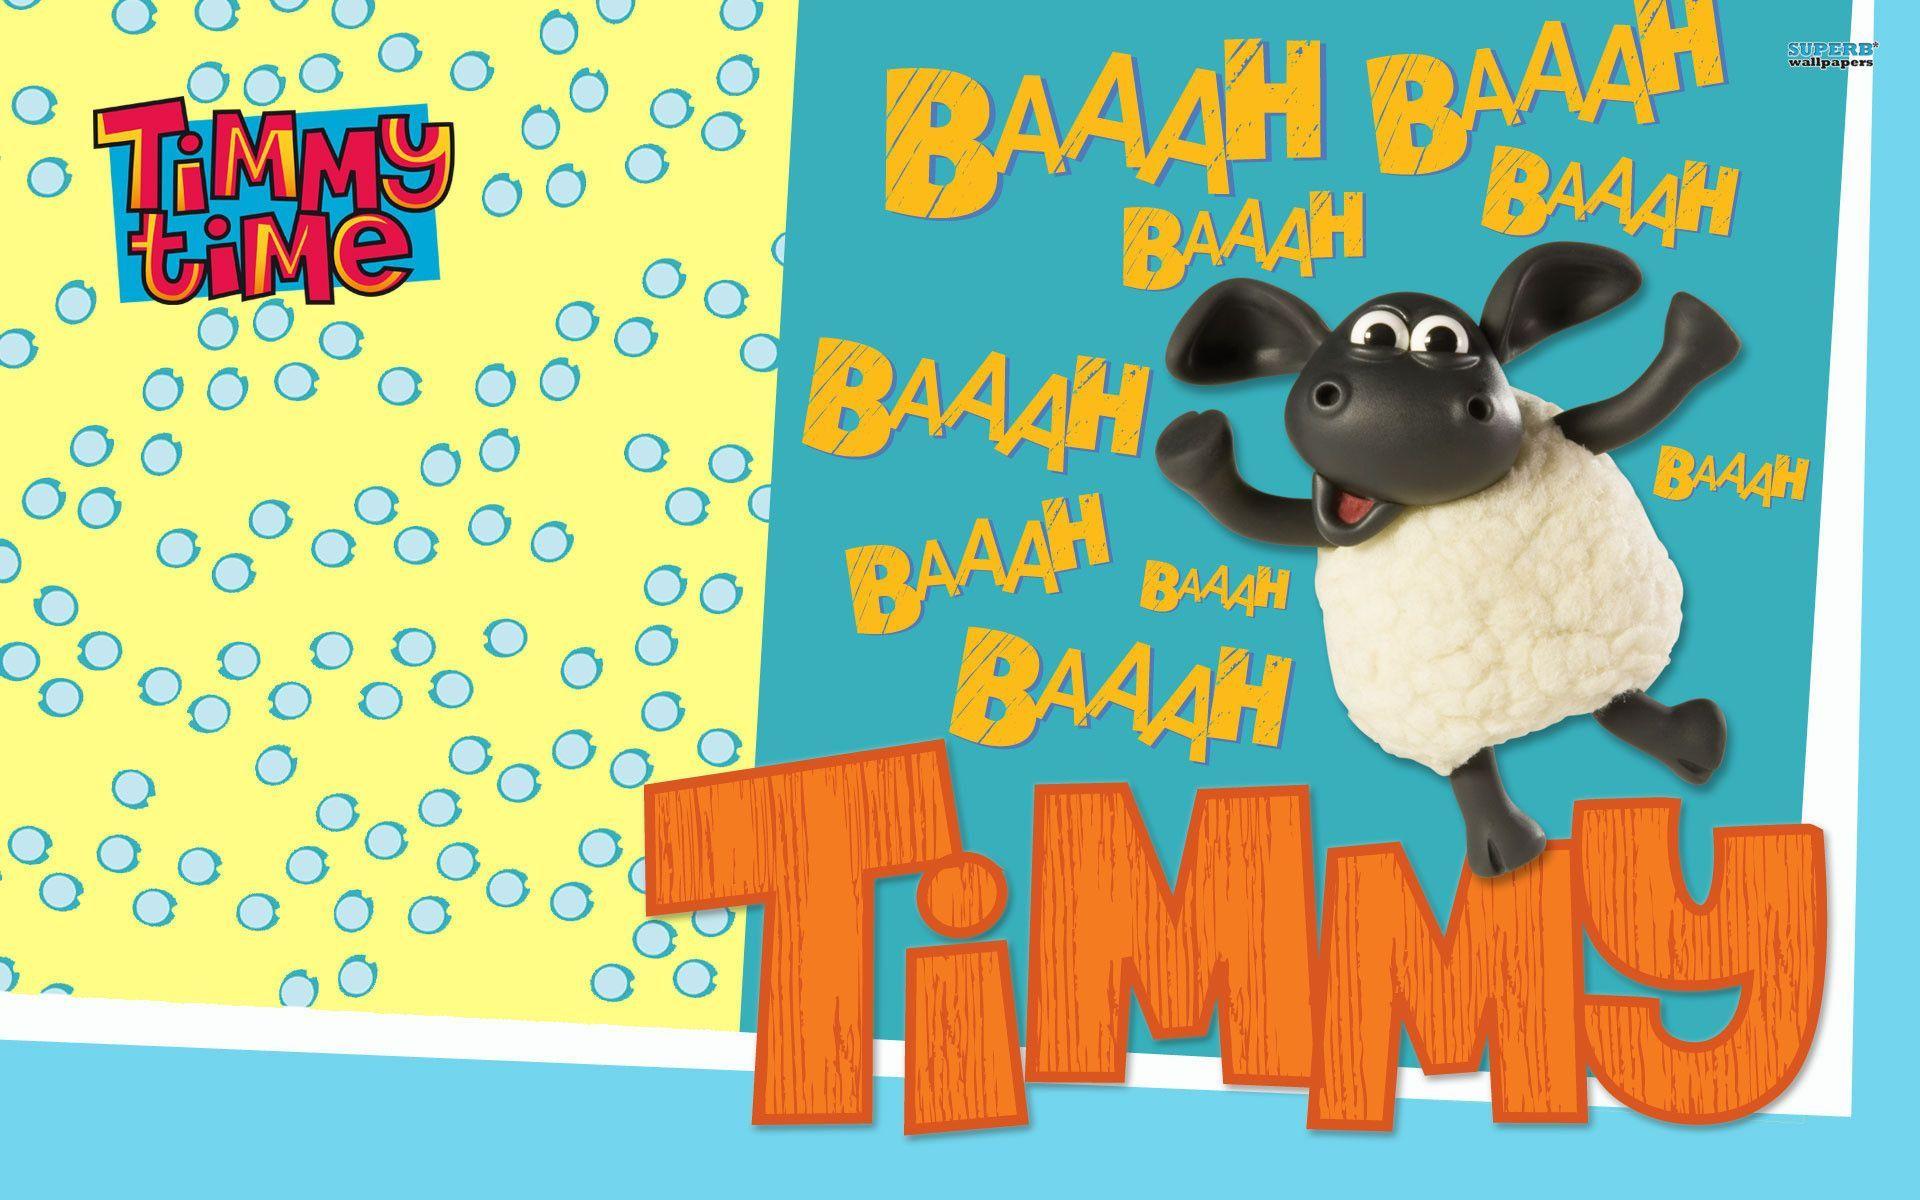 Timmy Time wallpaper